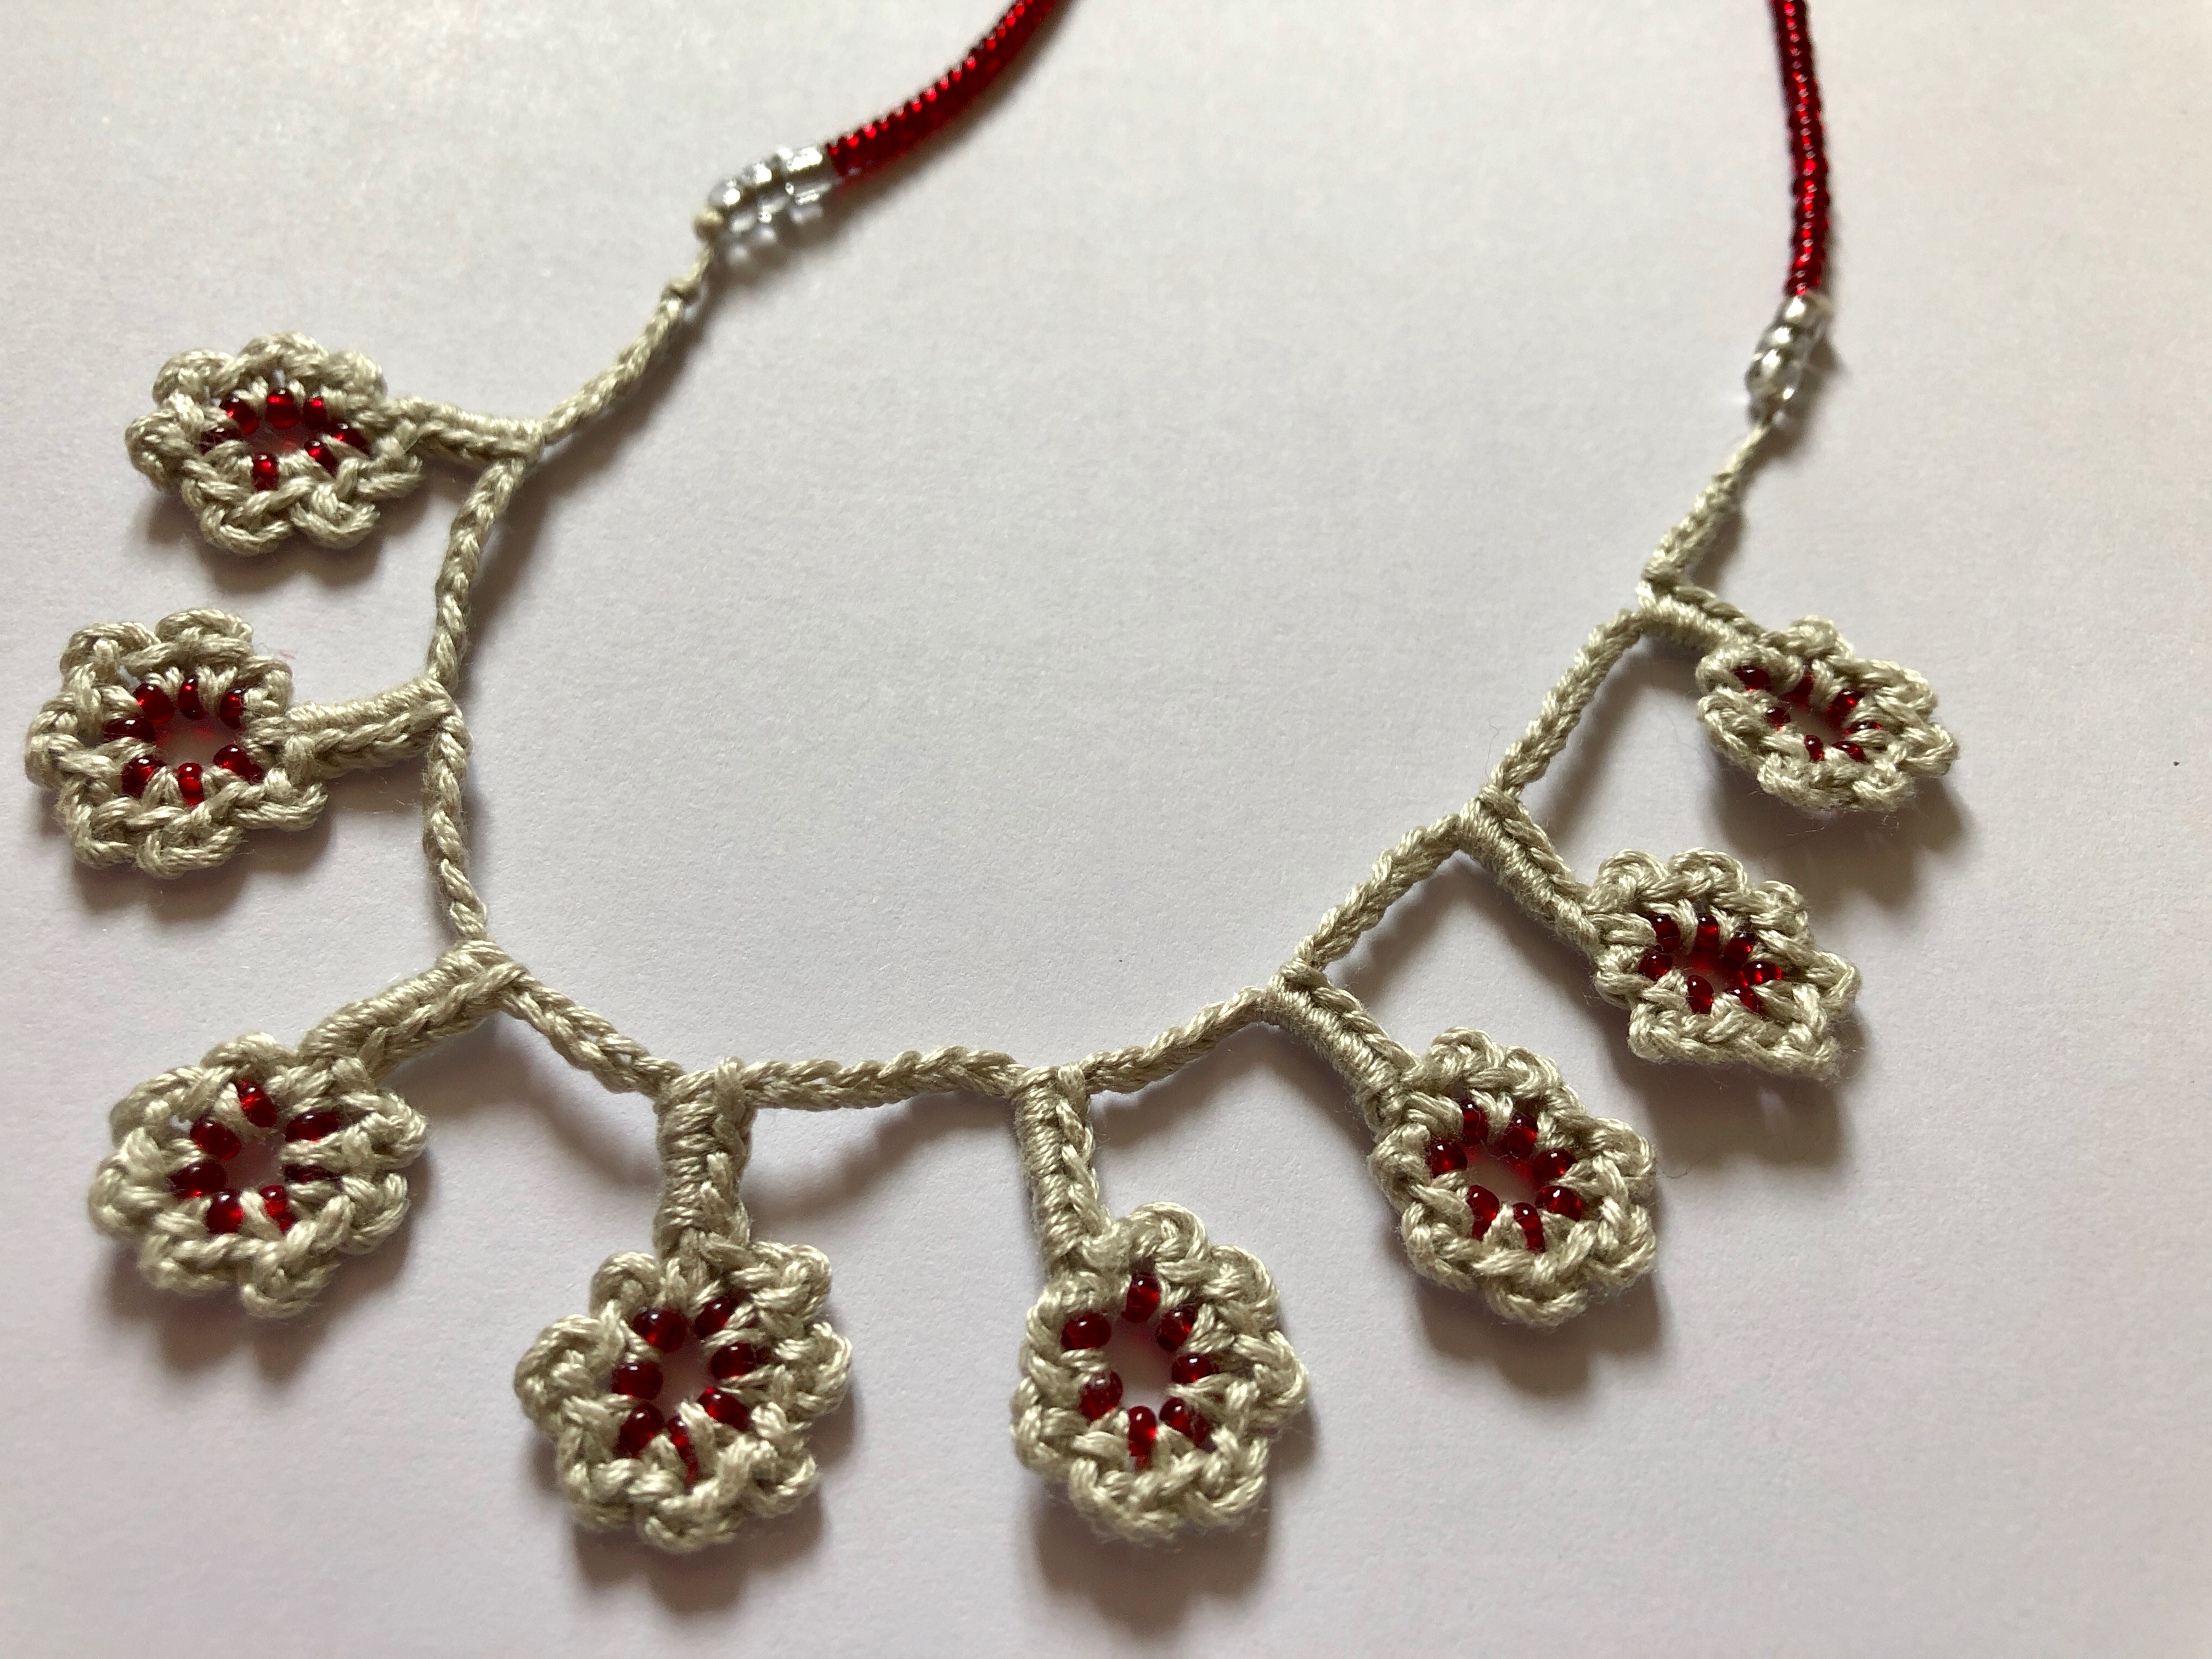 A grey cotton and burgundy red beaded hand crocheted flower necklace.